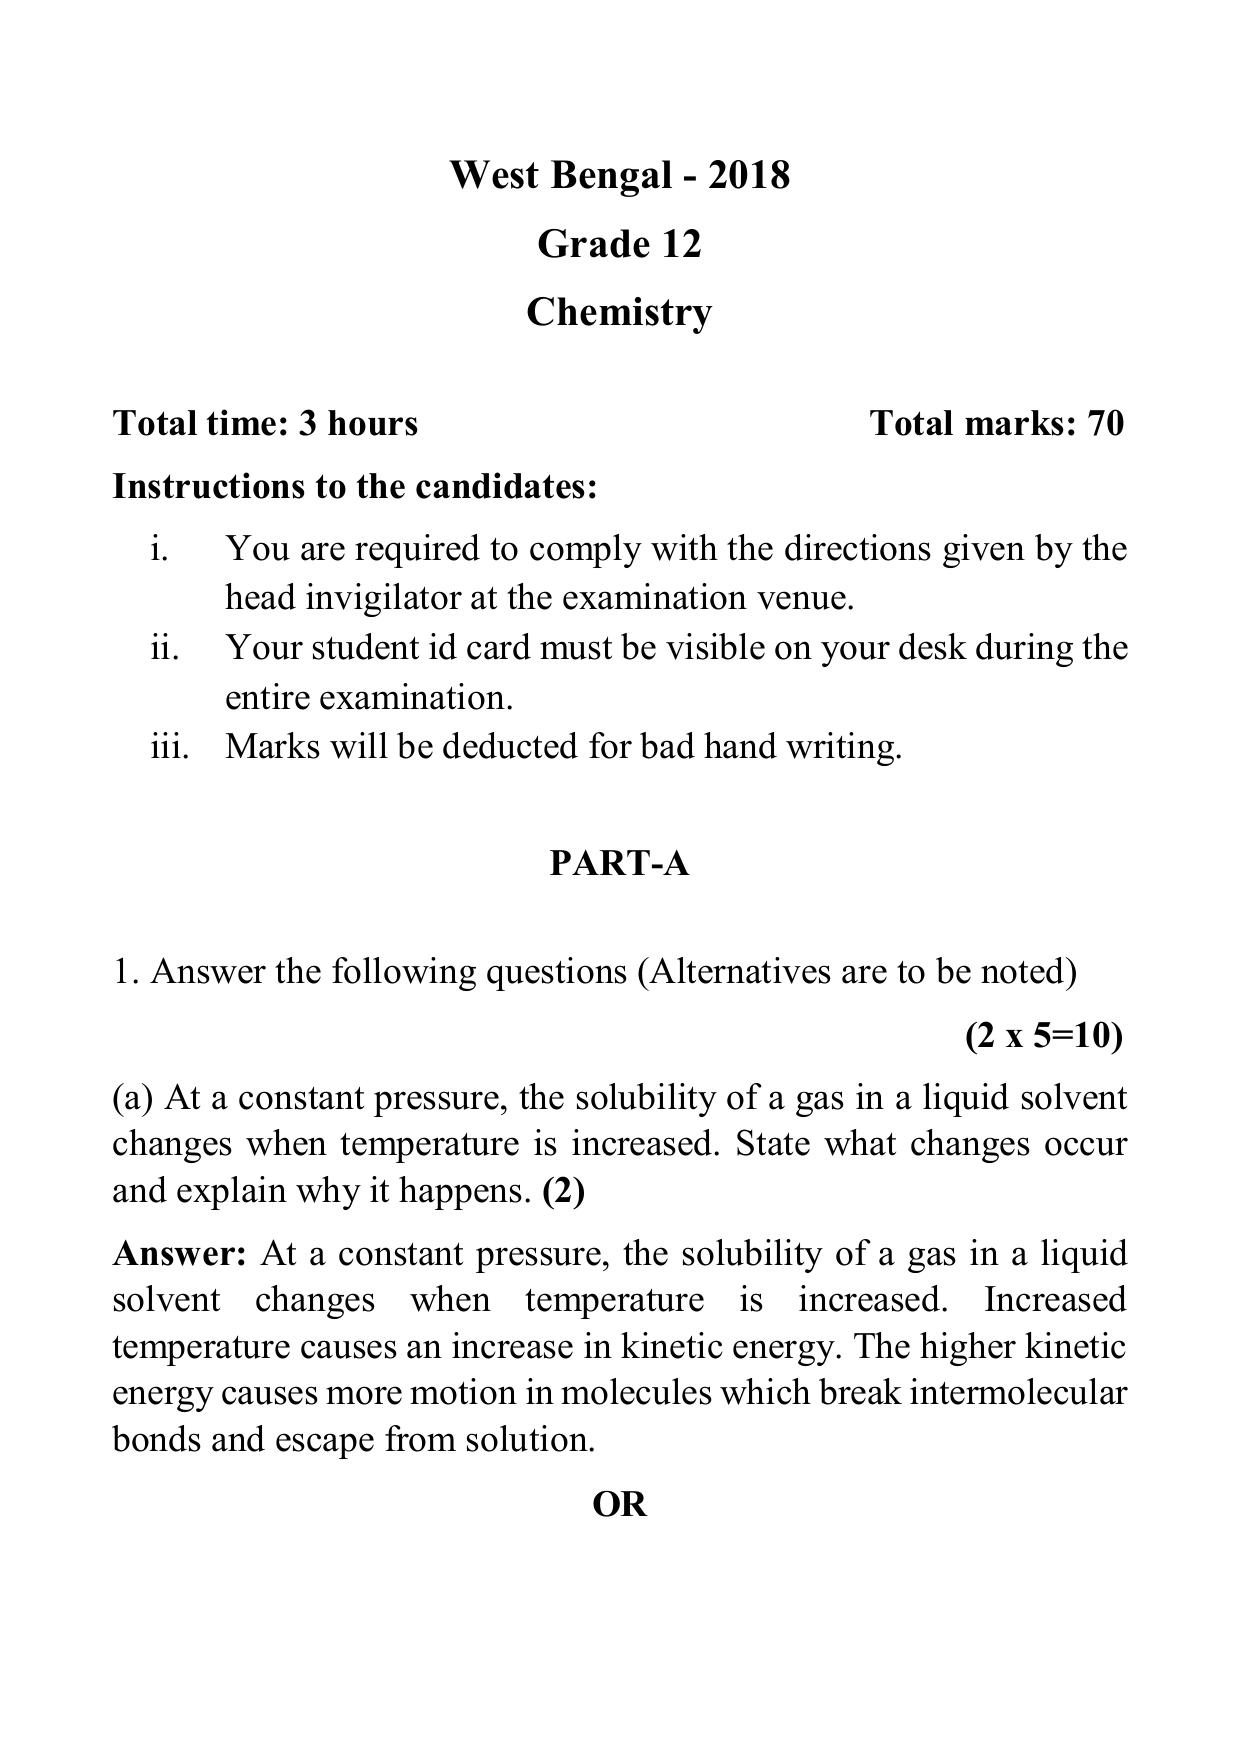 West Bengal Board Class 12 Chemistry 2018 Question Paper - Page 1